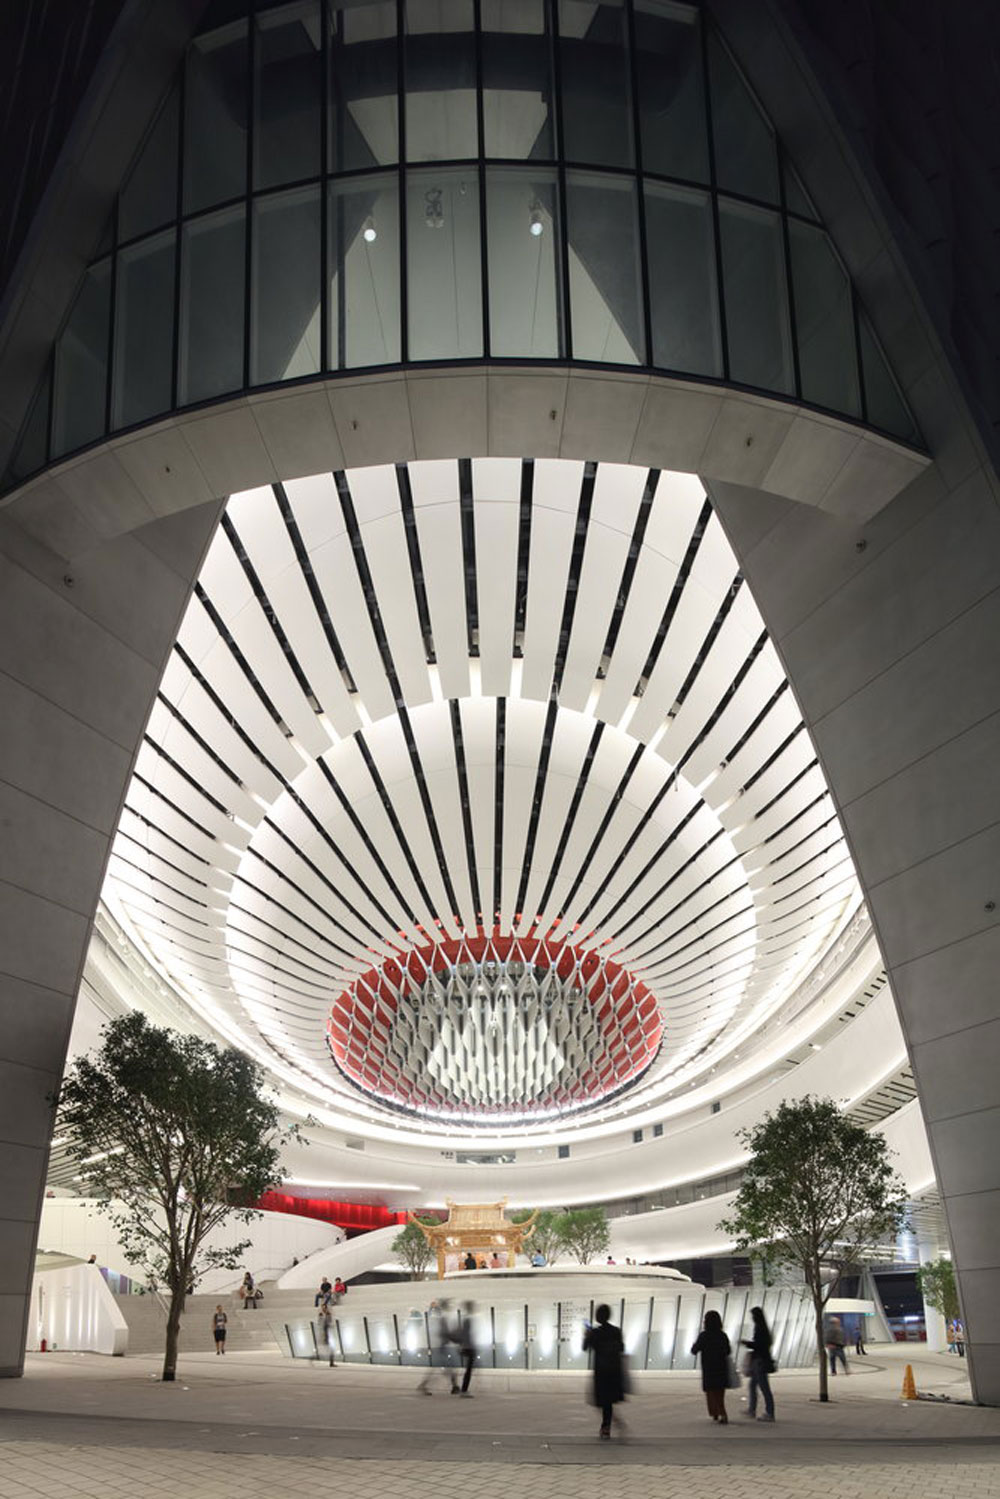 Revery Architecture Designs Hong Kong‘s West Kowloon Cultural District With Ronald Lu &amp; Partners